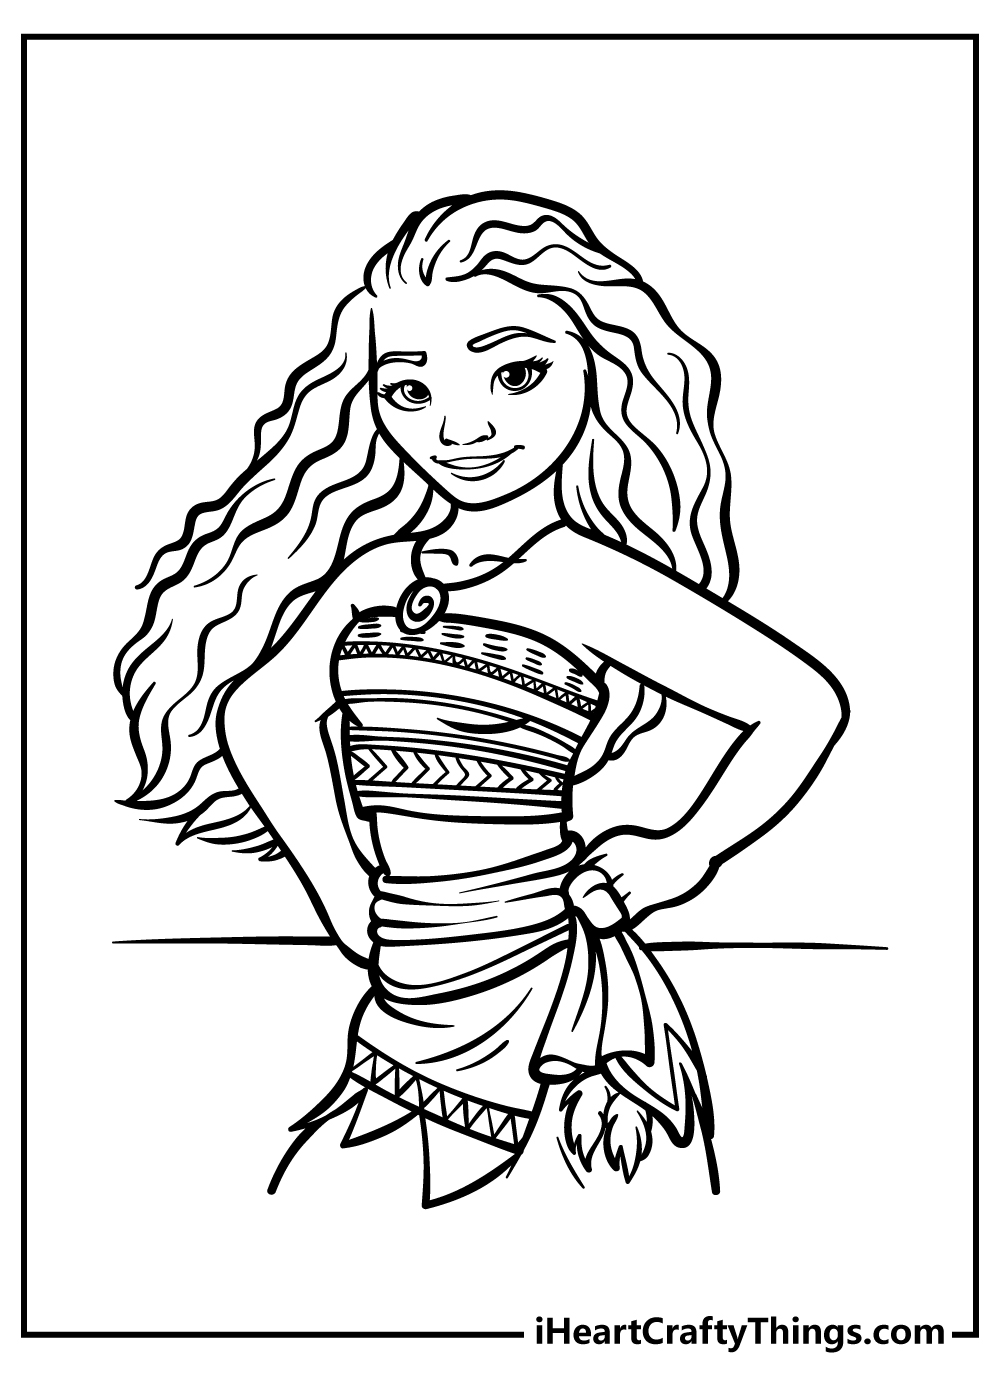 Printable Moana Coloring Pages Updated 21